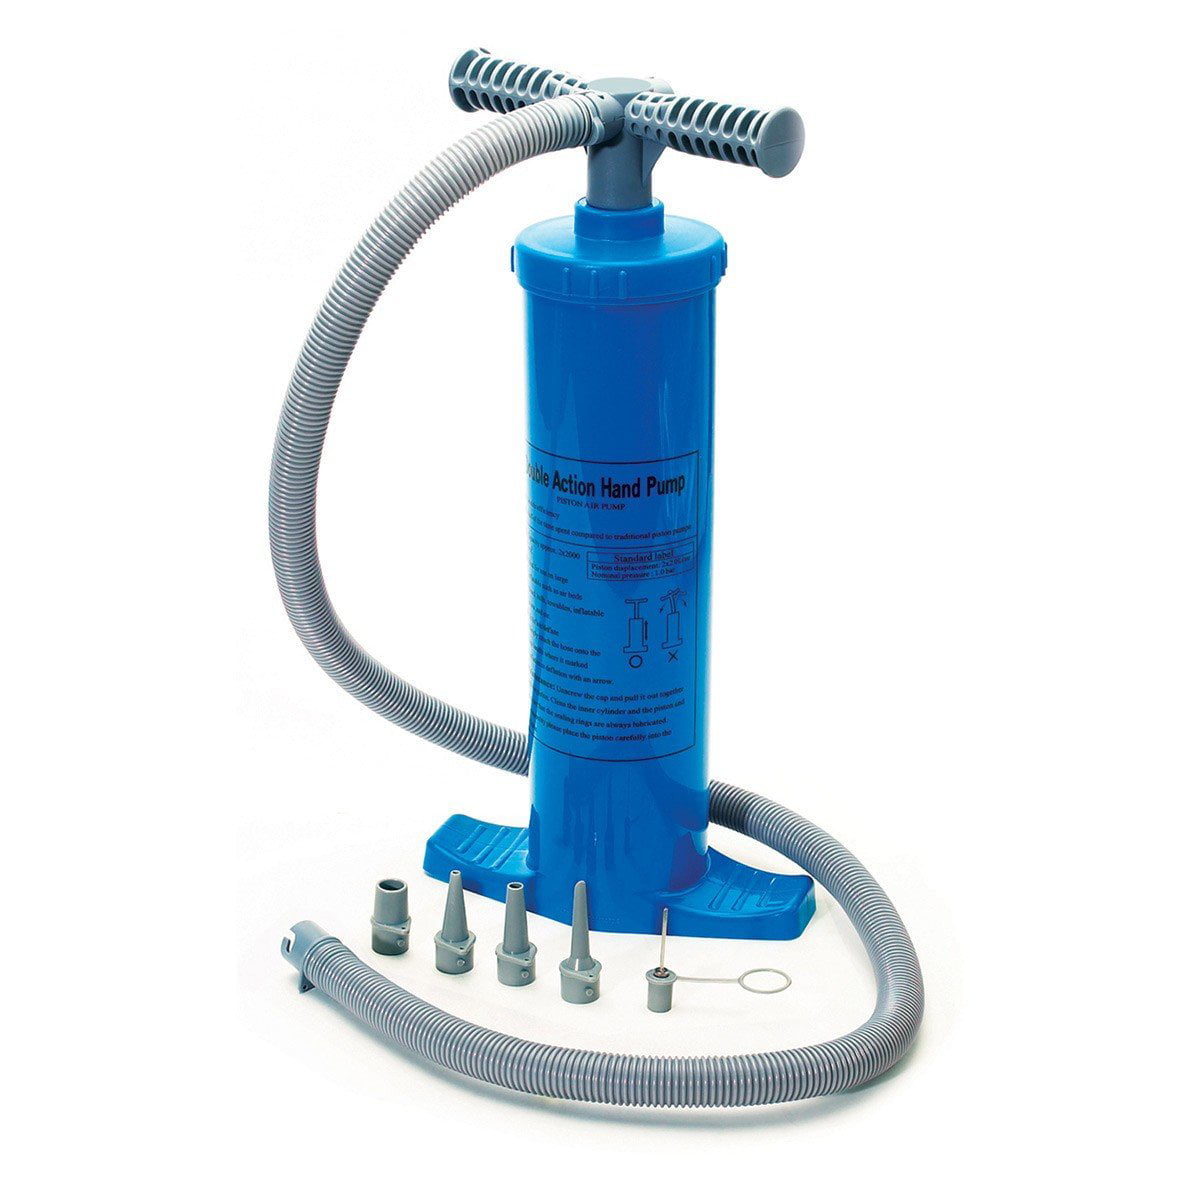 RAVE Sports 02341 Double Action Hand Pump 